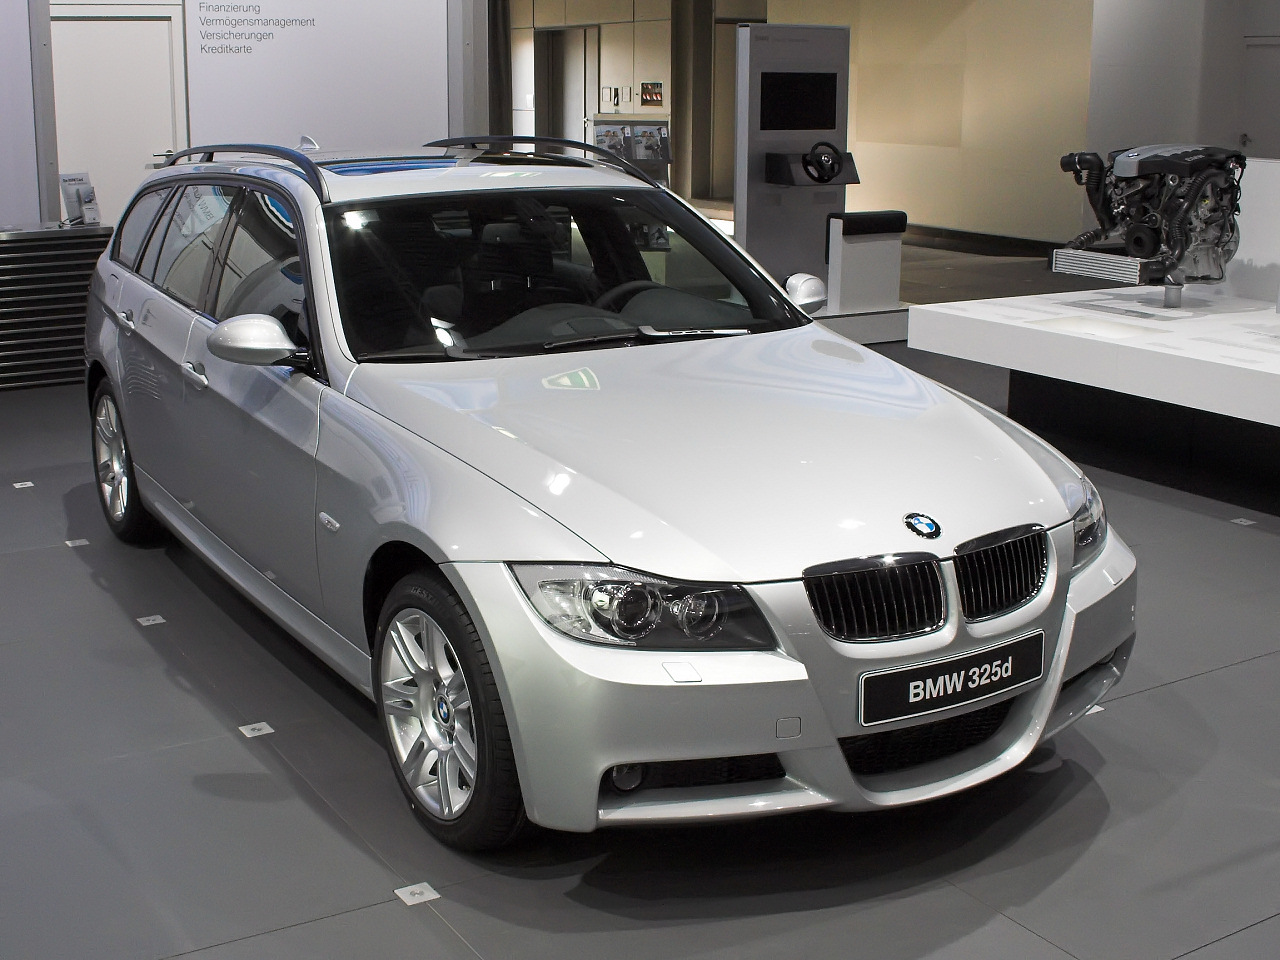 bmw 325d touring-pic. 1